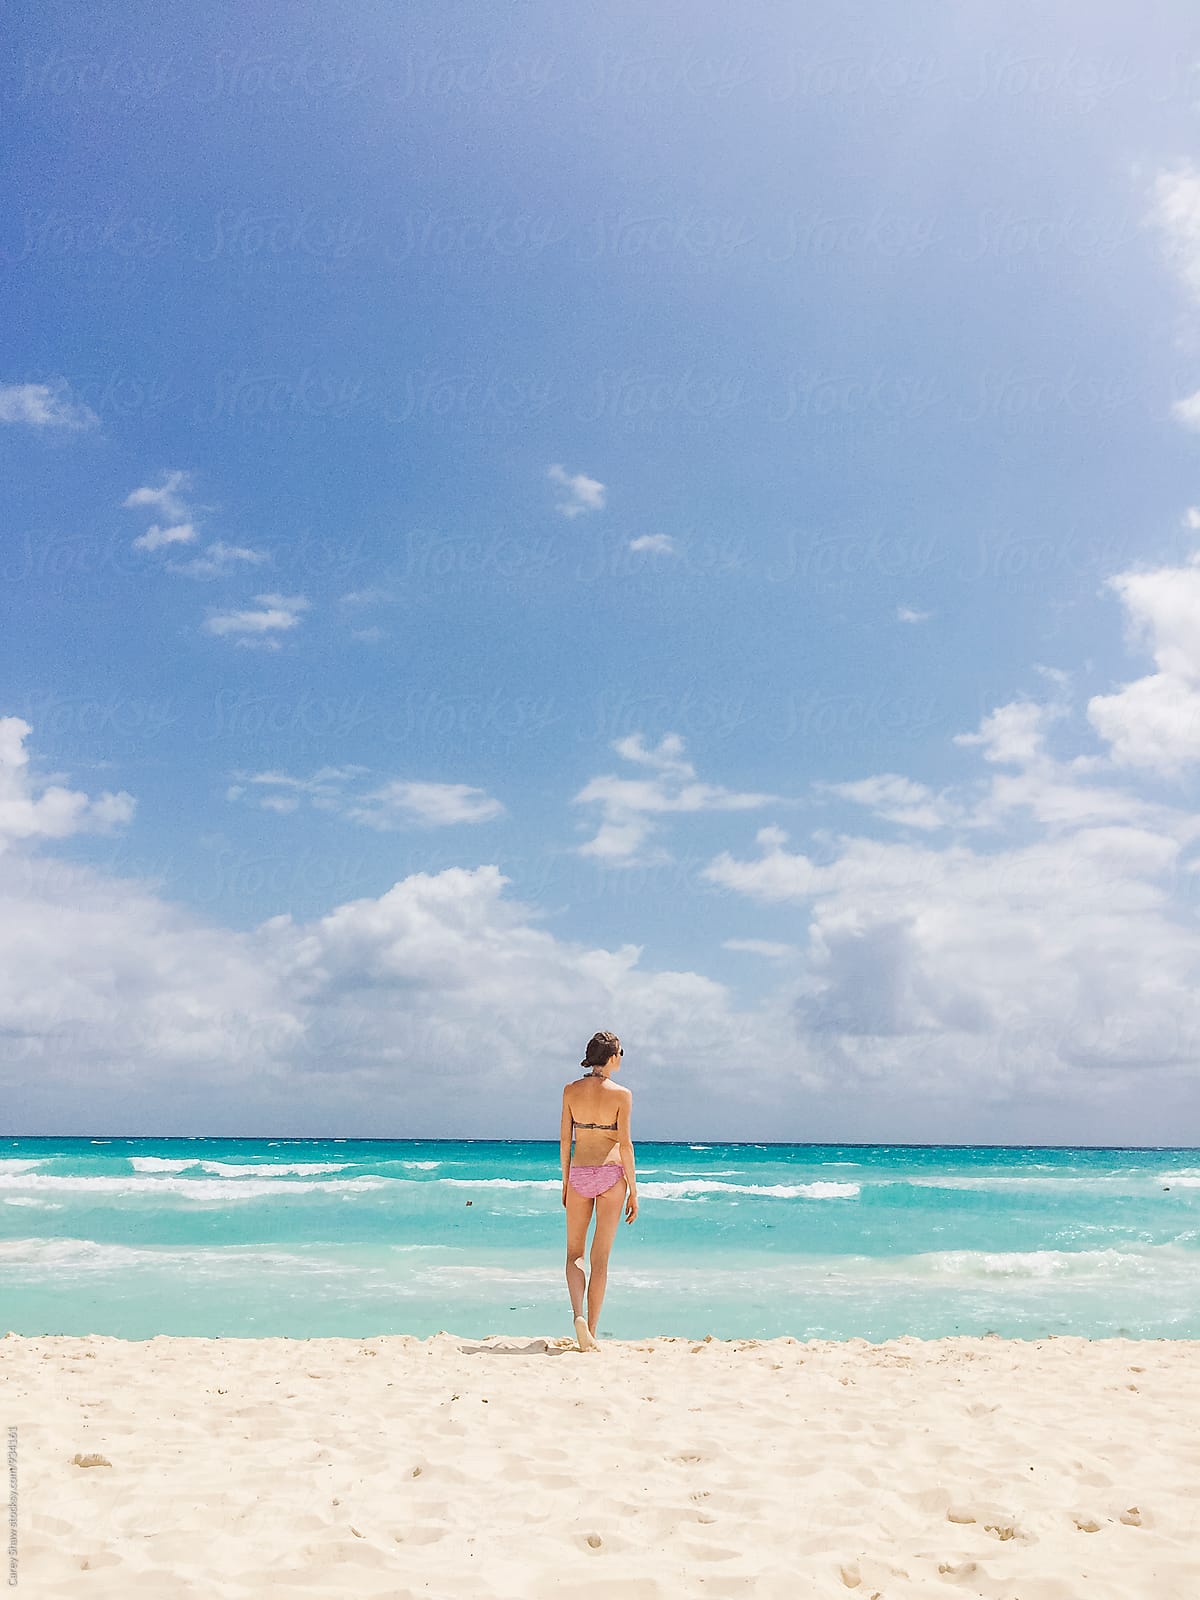 Woman In Bikini Standing On Beach Looking At The Ocean By Stocksy Contributor Carey Shaw